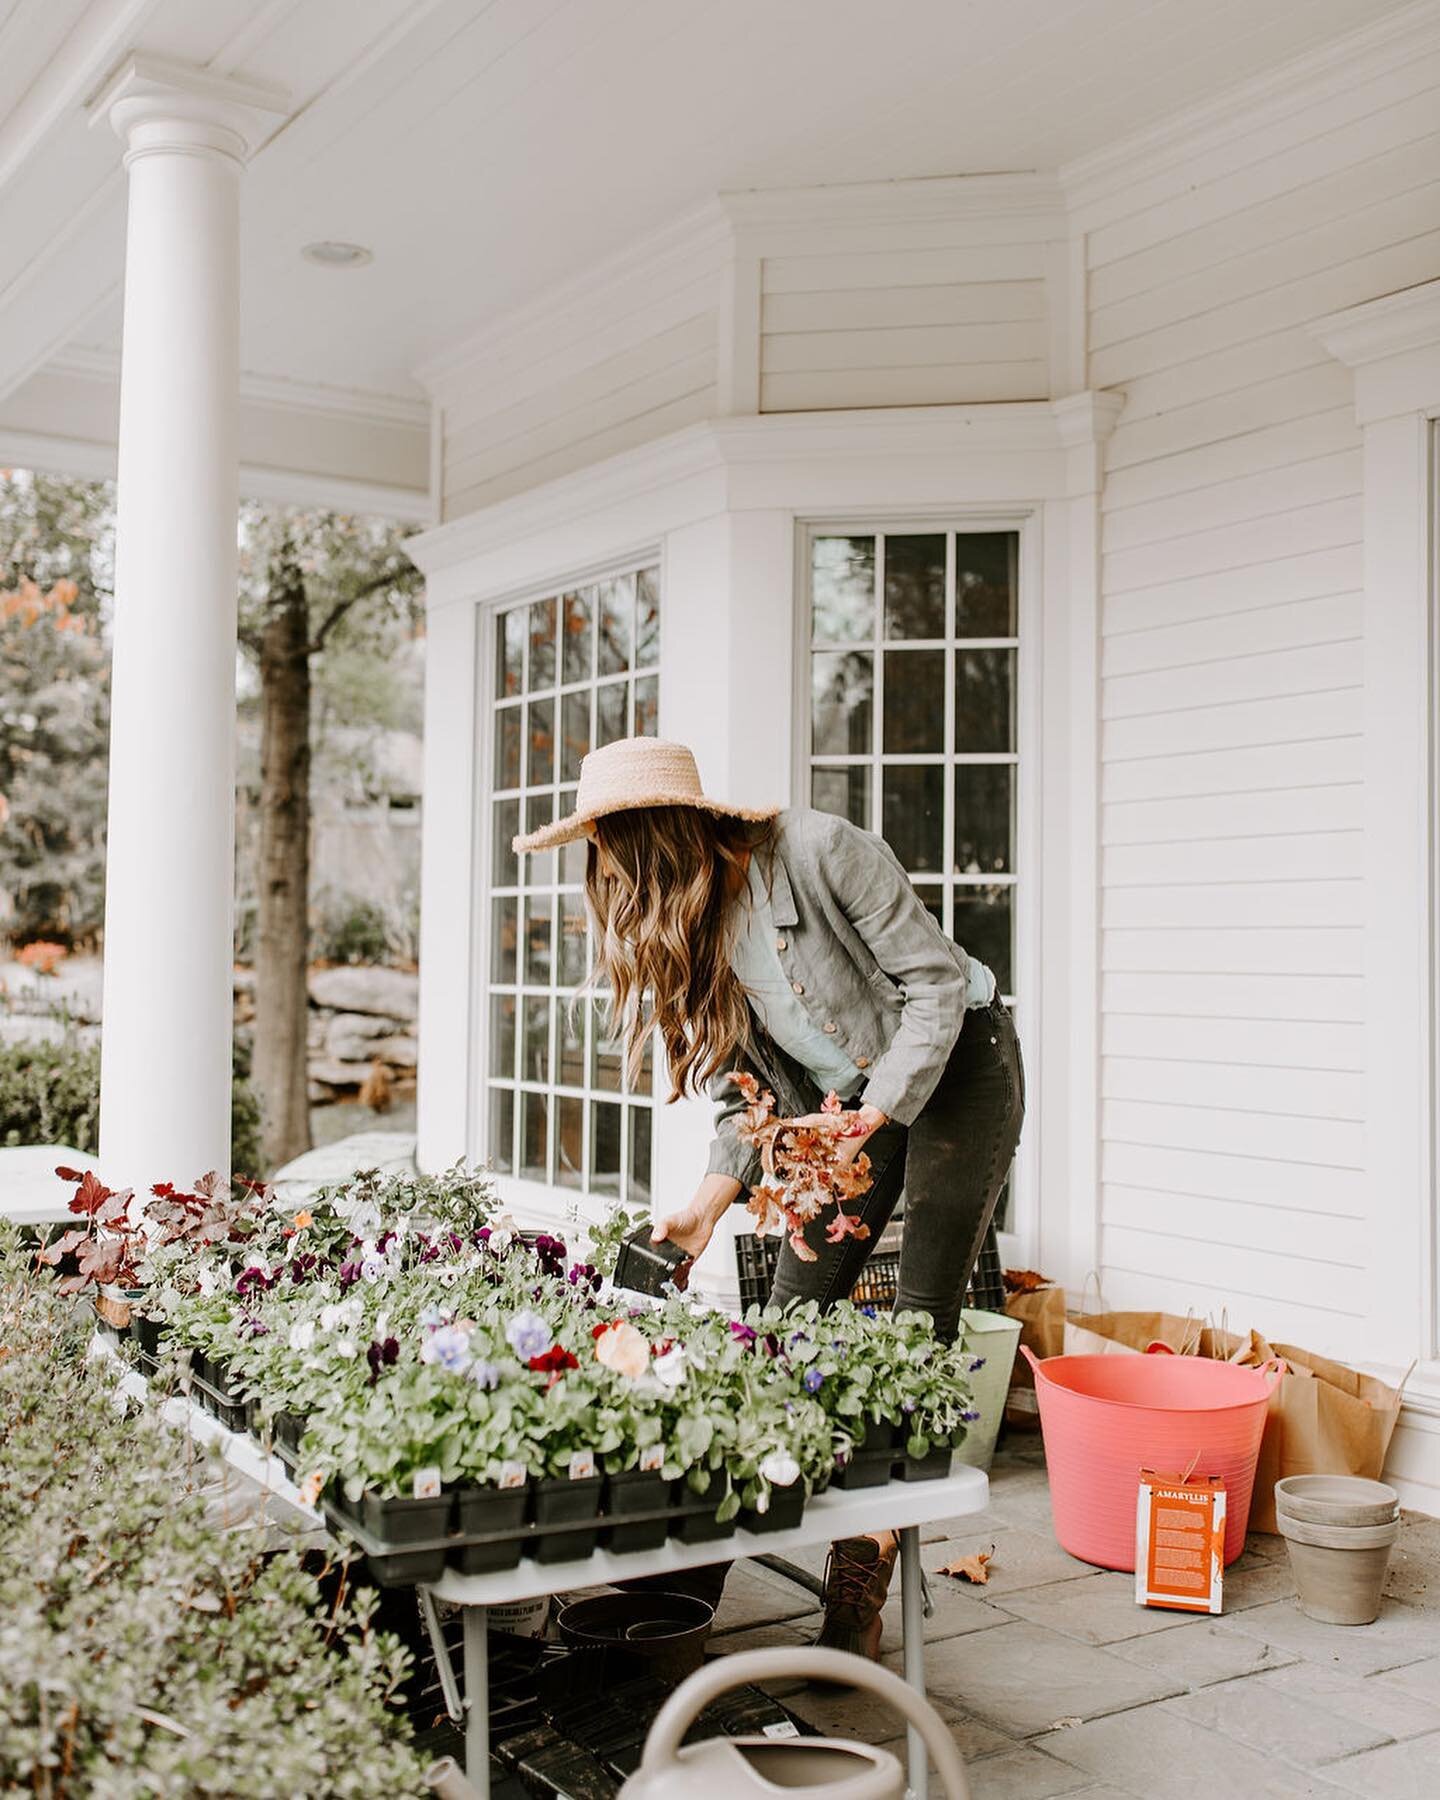 🌷 H A P P Y  S P R I N G 🌷

Such a beautiful time of year. The garden starts to wake up, the days get a little longer, and soil is workable! I hope you get to go outside and enjoy the weather today. 

What are you excited to plant this year? I&rsqu